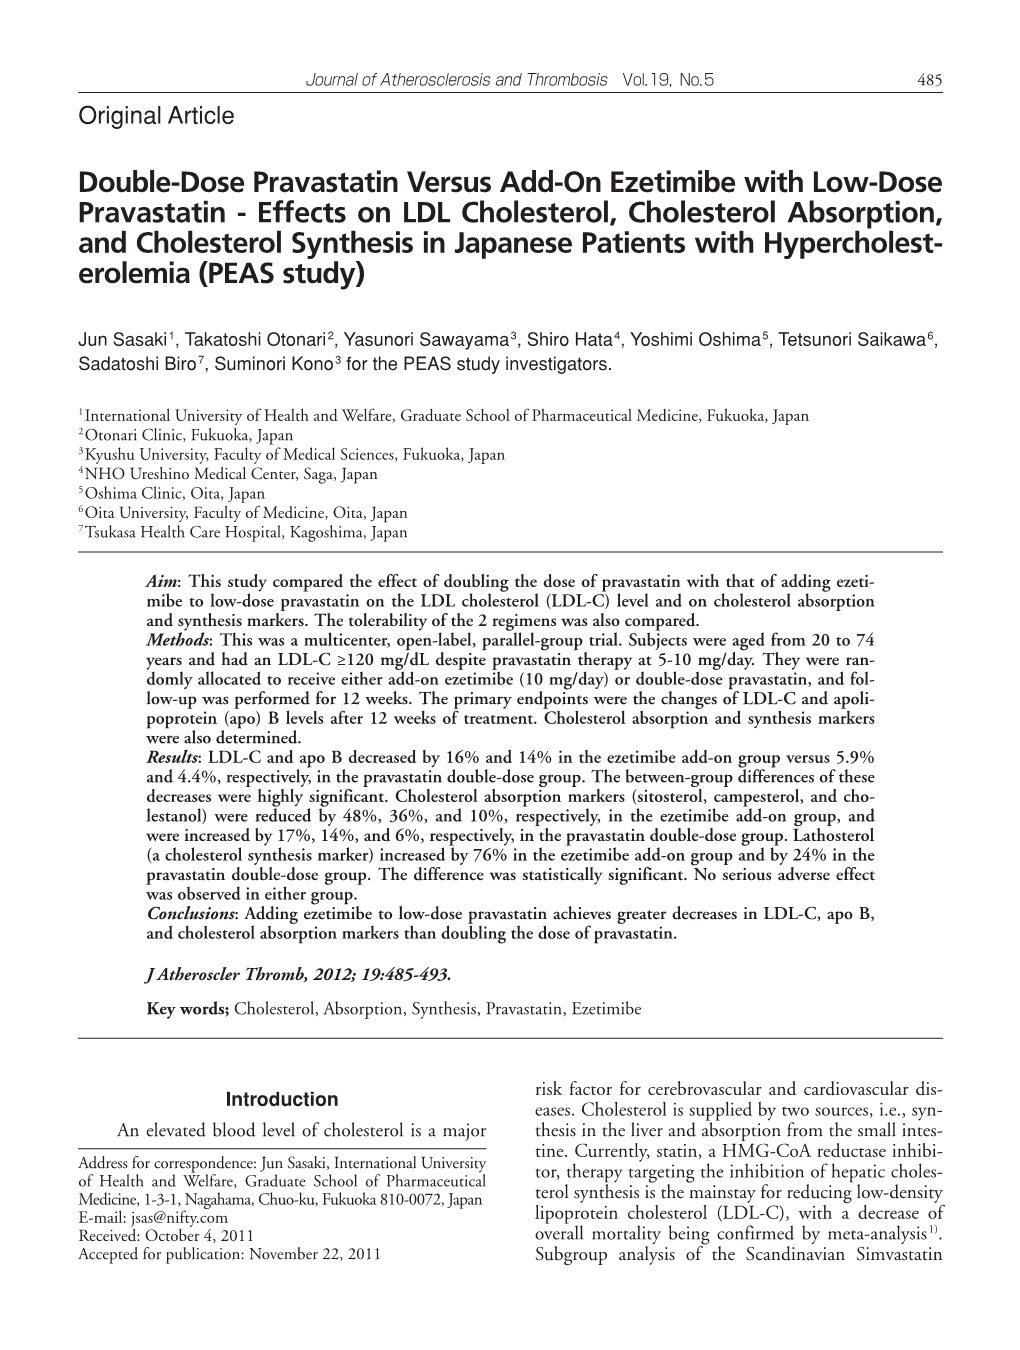 Effects on LDL Cholesterol, Cholesterol Absorption, and Cholesterol Synthesis in Japanese Patients with Hypercholest­ Erolemia (PEAS Study)